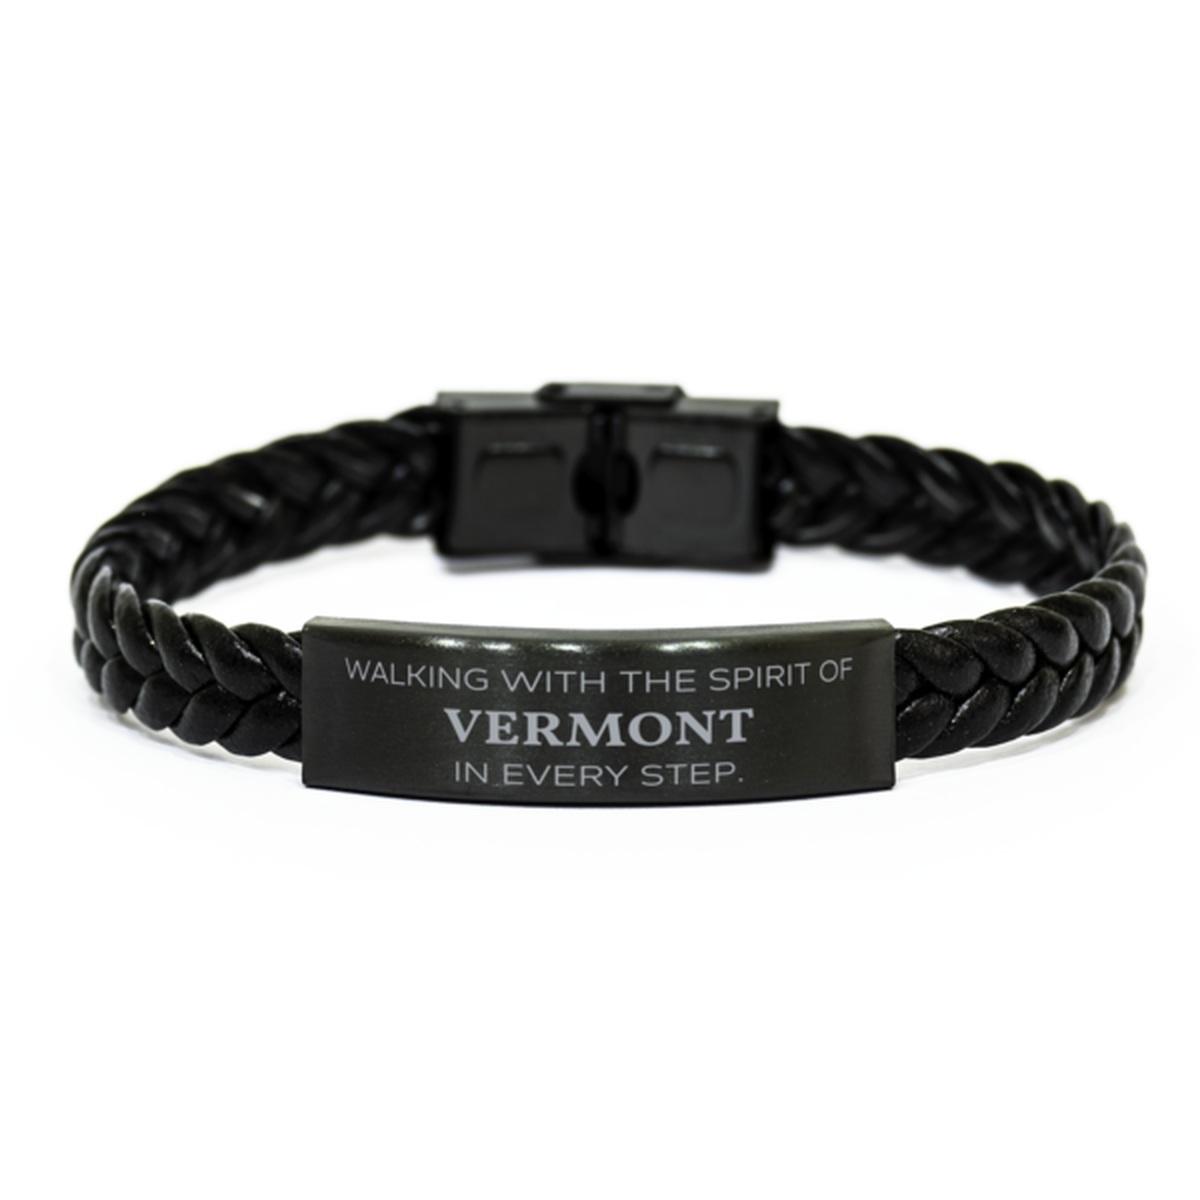 Vermont Gifts, Walking with the spirit, Love Vermont Birthday Christmas Braided Leather Bracelet For Vermont People, Men, Women, Friends